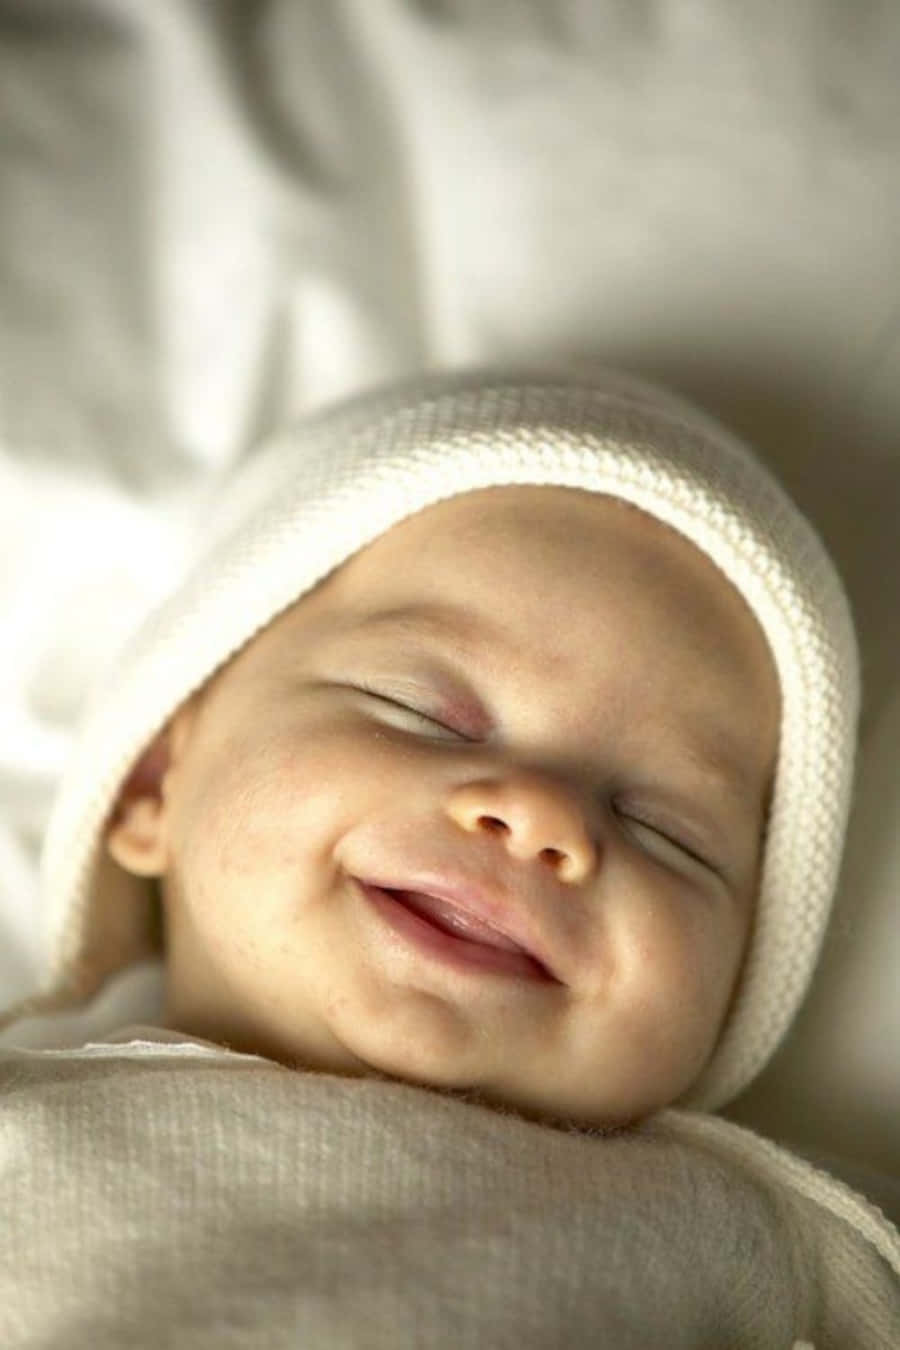 Smile Face of Cute Baby | HD Wallpapers